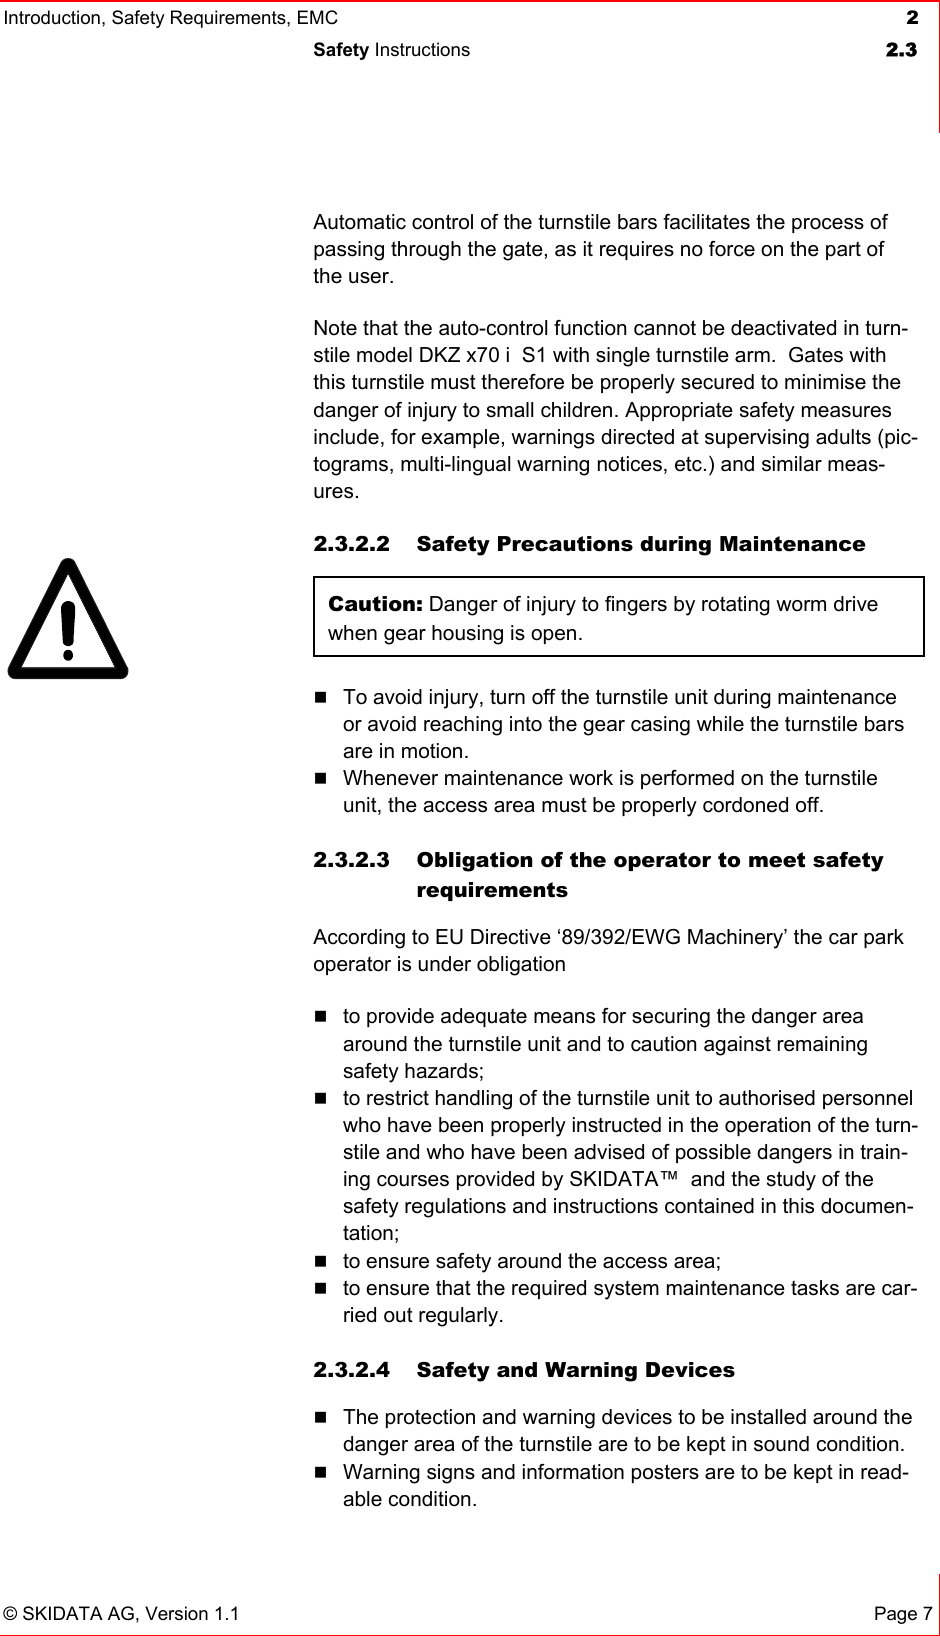 Introduction, Safety Requirements, EMC  2 Safety Instructions  2.3   © SKIDATA AG, Version 1.1 Page 7 Automatic control of the turnstile bars facilitates the process of passing through the gate, as it requires no force on the part of the user. Note that the auto-control function cannot be deactivated in turn-stile model DKZ x70 i  S1 with single turnstile arm.  Gates with this turnstile must therefore be properly secured to minimise the danger of injury to small children. Appropriate safety measures include, for example, warnings directed at supervising adults (pic-tograms, multi-lingual warning notices, etc.) and similar meas-ures. 2.3.2.2  Safety Precautions during Maintenance Caution: Danger of injury to fingers by rotating worm drive when gear housing is open.    To avoid injury, turn off the turnstile unit during maintenance or avoid reaching into the gear casing while the turnstile bars are in motion.  Whenever maintenance work is performed on the turnstile unit, the access area must be properly cordoned off.   2.3.2.3  Obligation of the operator to meet safety requirements According to EU Directive ‘89/392/EWG Machinery’ the car park operator is under obligation  to provide adequate means for securing the danger area around the turnstile unit and to caution against remaining safety hazards;  to restrict handling of the turnstile unit to authorised personnel who have been properly instructed in the operation of the turn-stile and who have been advised of possible dangers in train-ing courses provided by SKIDATA™  and the study of the safety regulations and instructions contained in this documen-tation;  to ensure safety around the access area;  to ensure that the required system maintenance tasks are car-ried out regularly.  2.3.2.4  Safety and Warning Devices  The protection and warning devices to be installed around the danger area of the turnstile are to be kept in sound condition.  Warning signs and information posters are to be kept in read-able condition.  